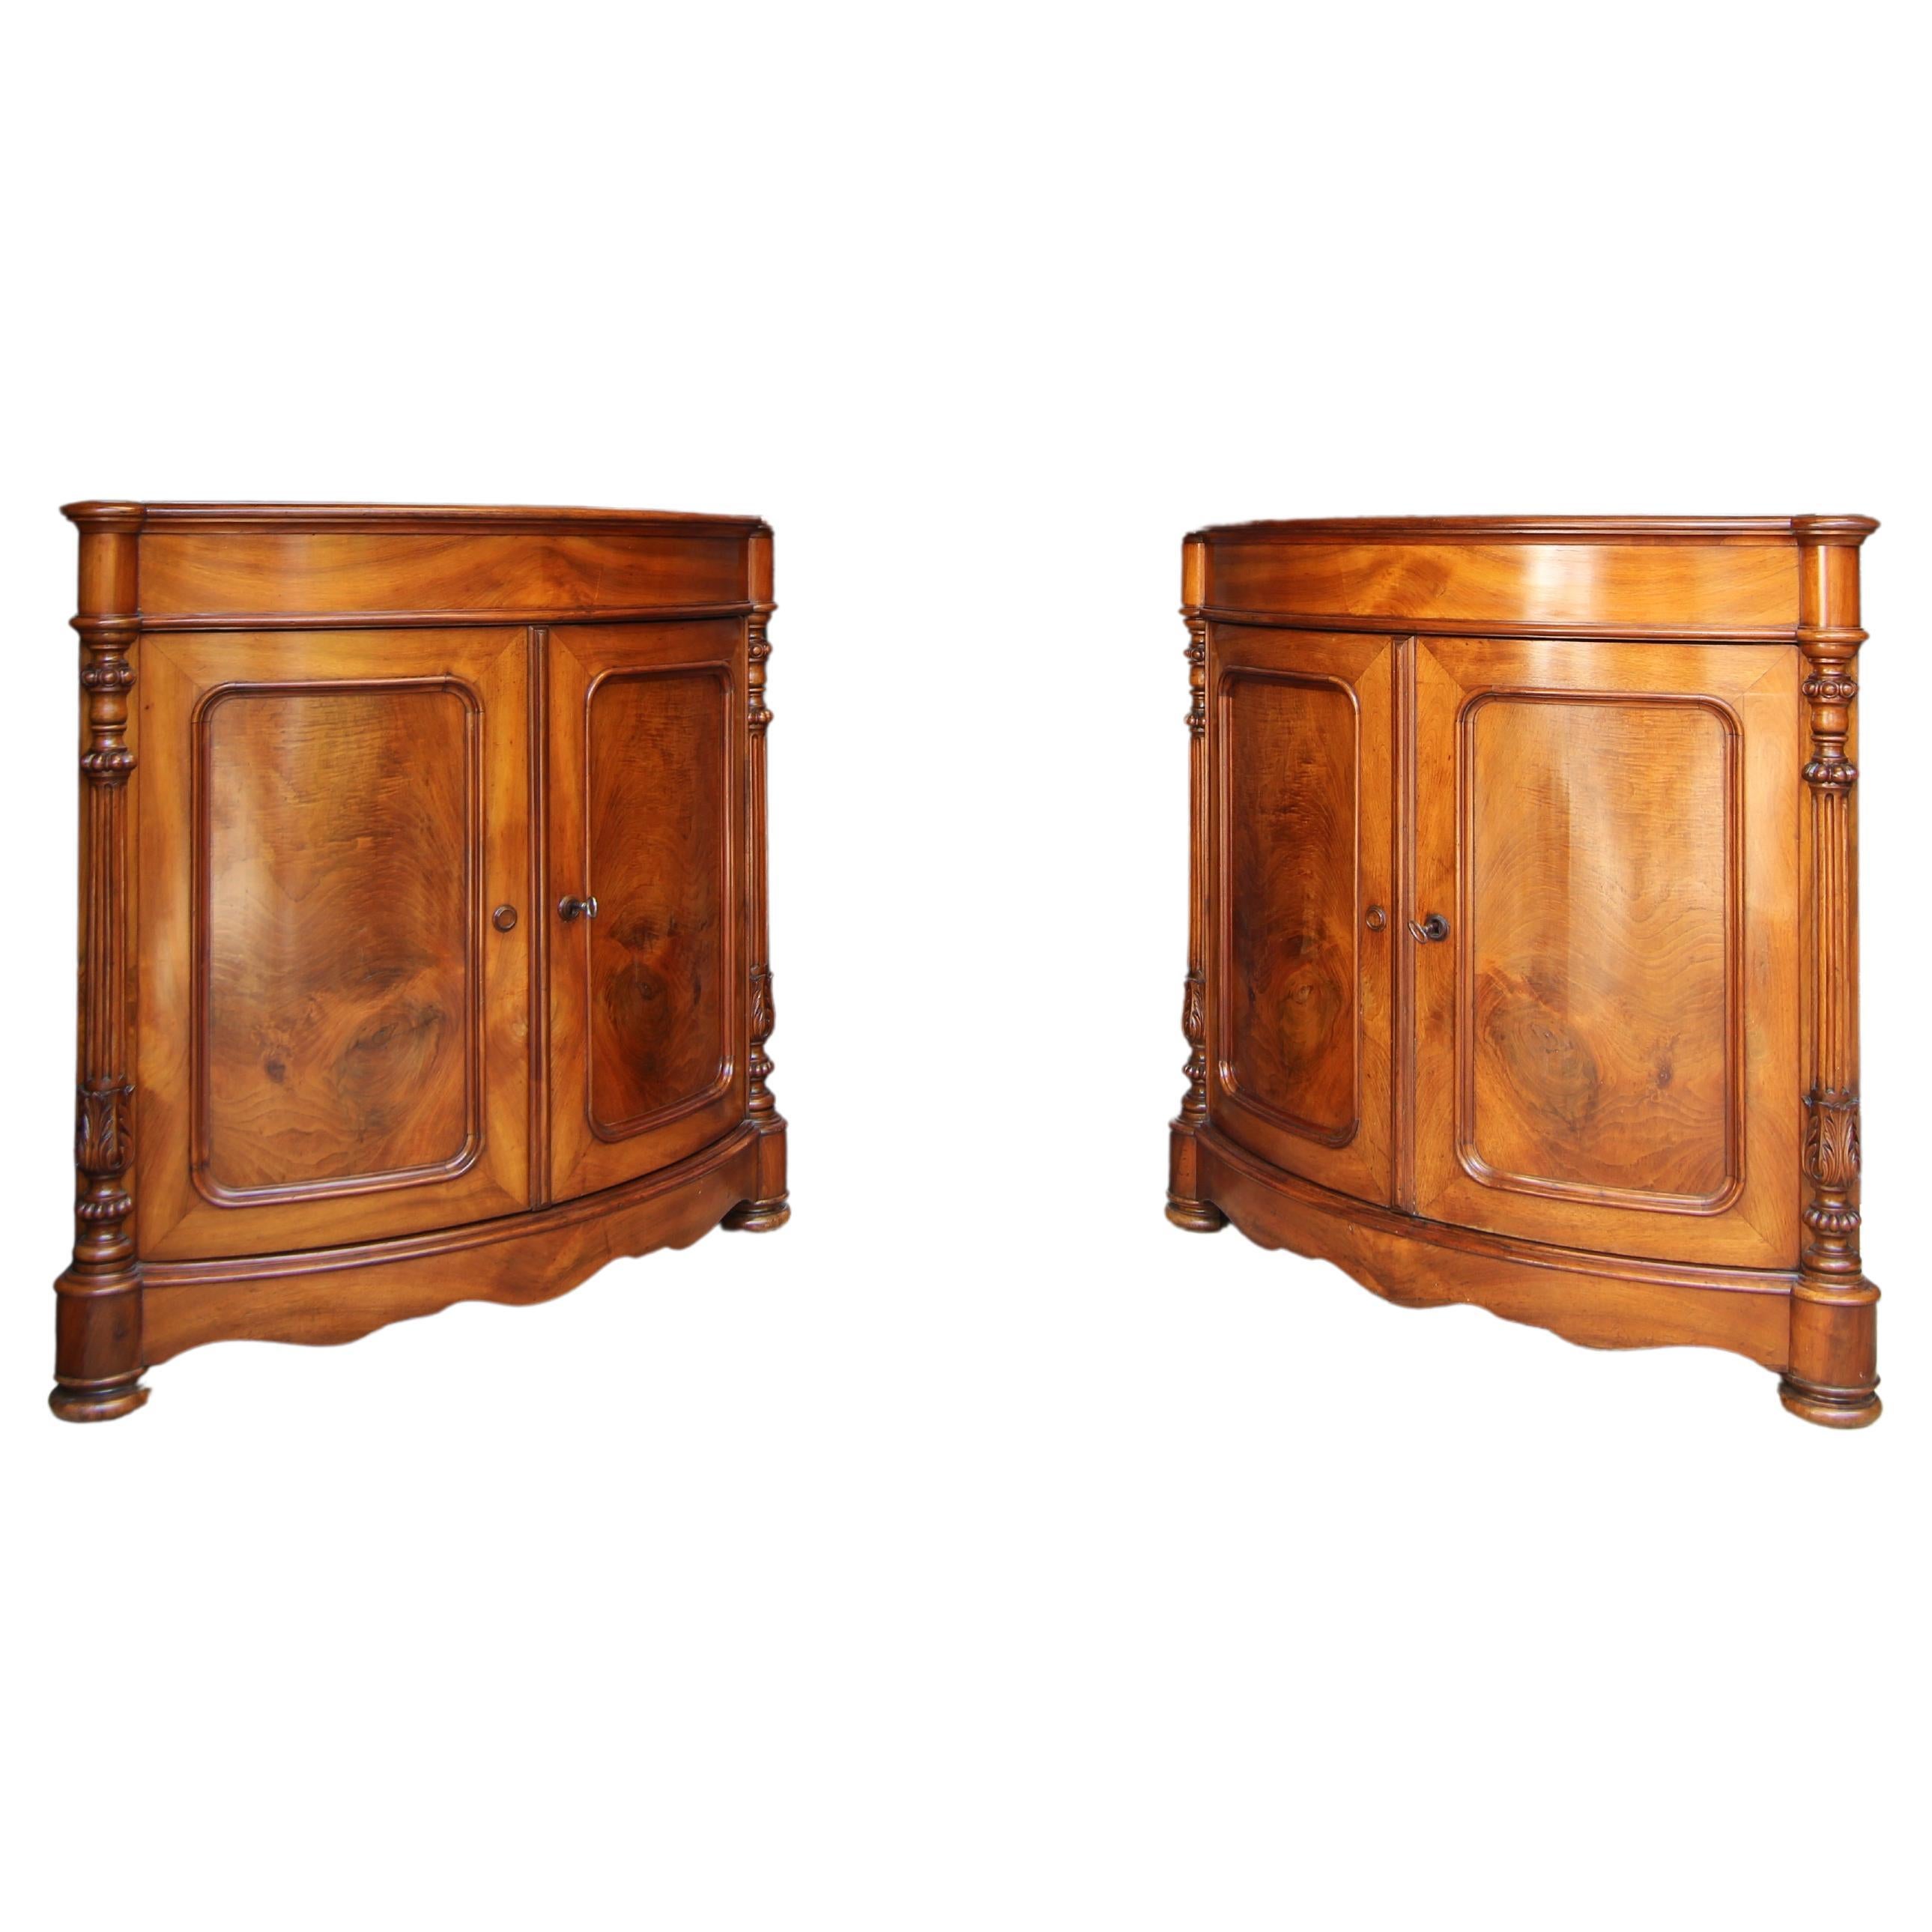 A pair of identical Louis Philippe corner cupboards from around 1860. Solid walnut and veneered on oak. 

Half-height two-door corner corpus with curved front, curved plinth apron and fluted profiled top. Round pilasters with carved and turned, as